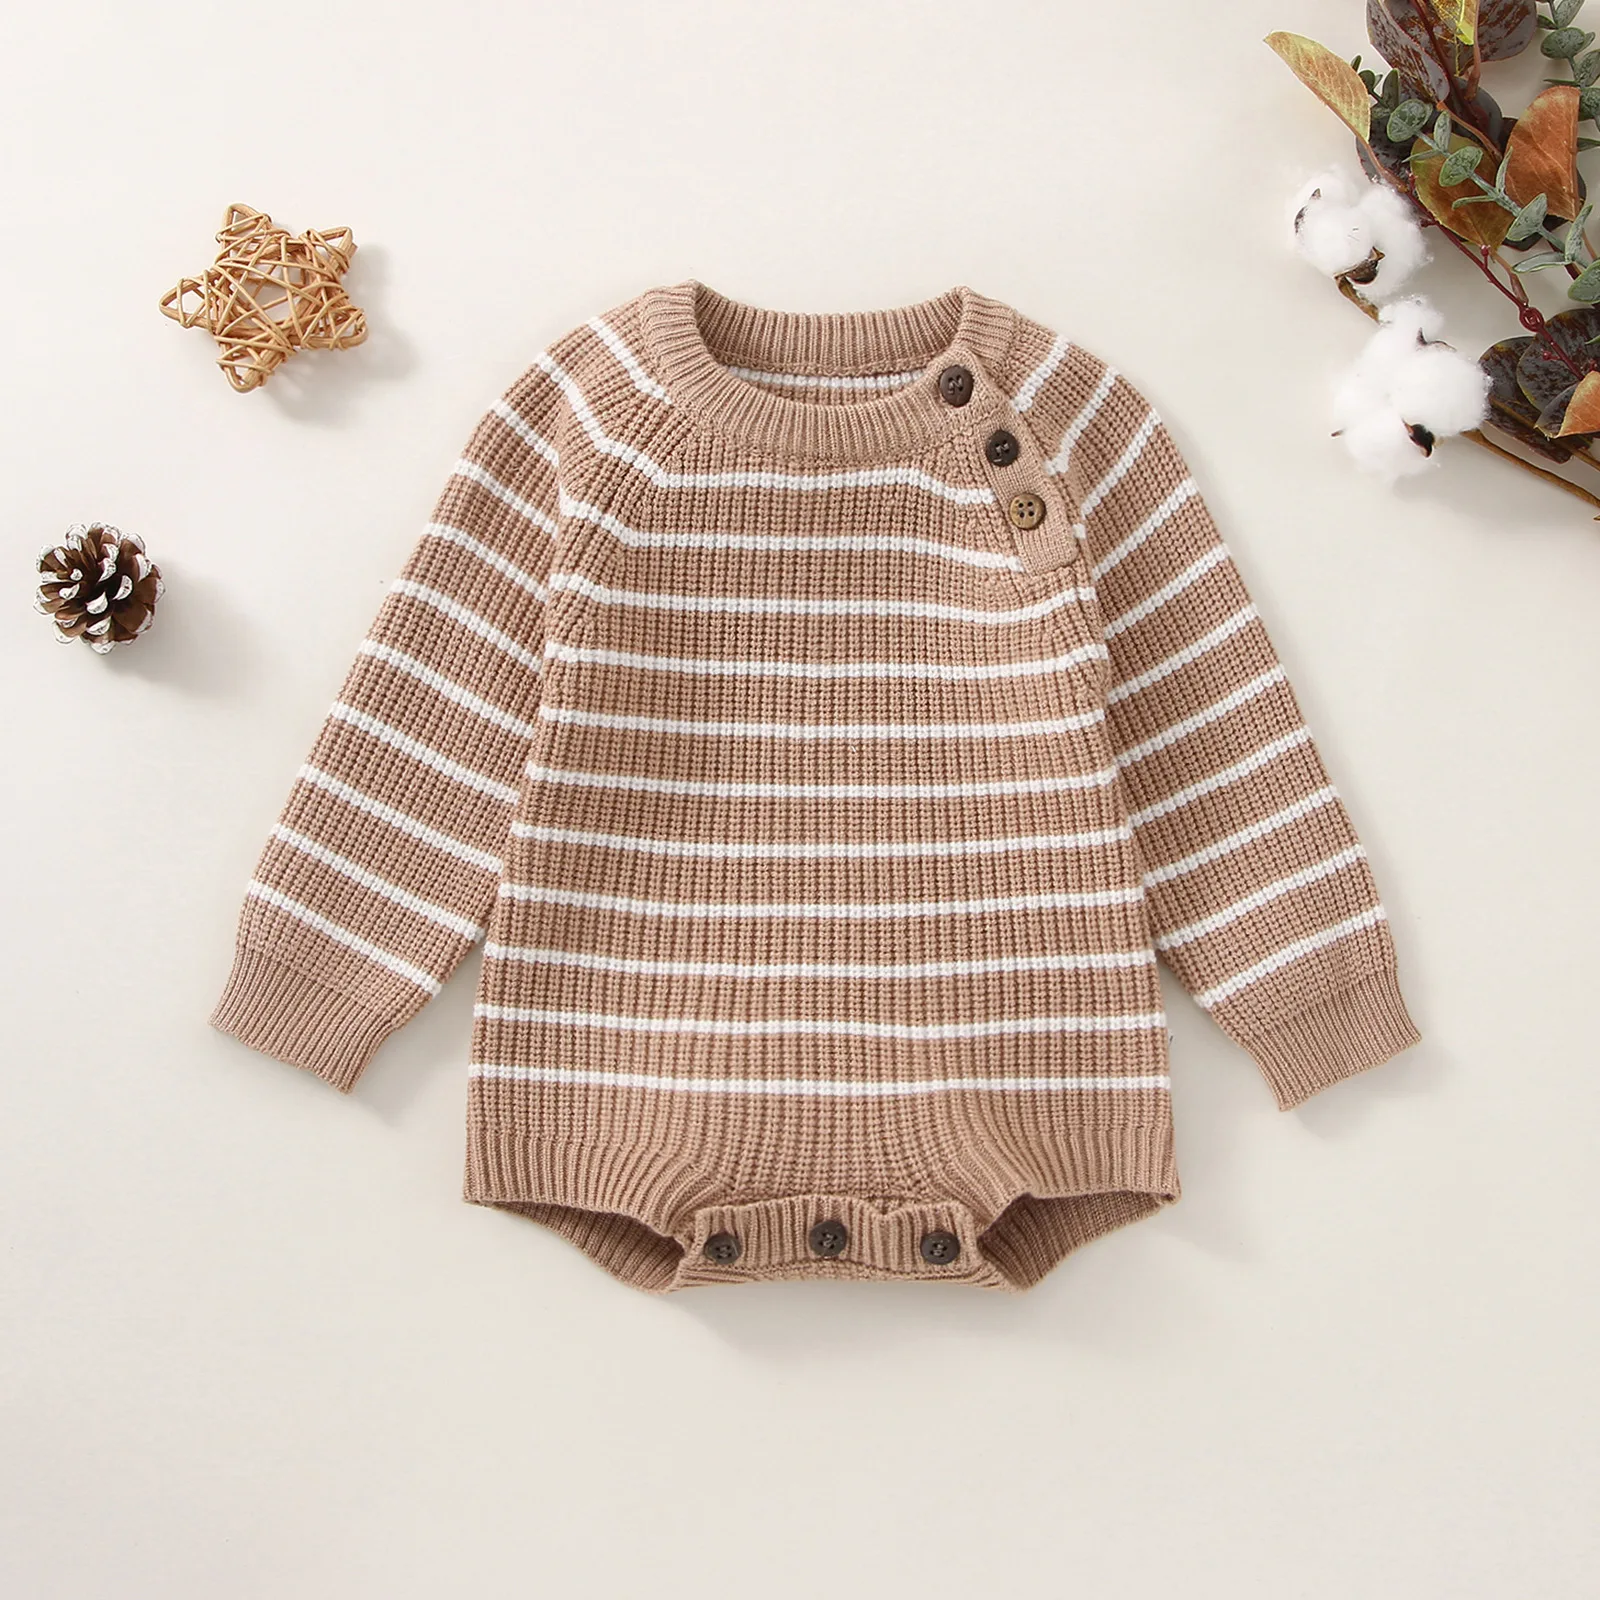 INS 2022 autumn clothes soft knitted sweater stripe design good quality kids clothes baby girls rompers